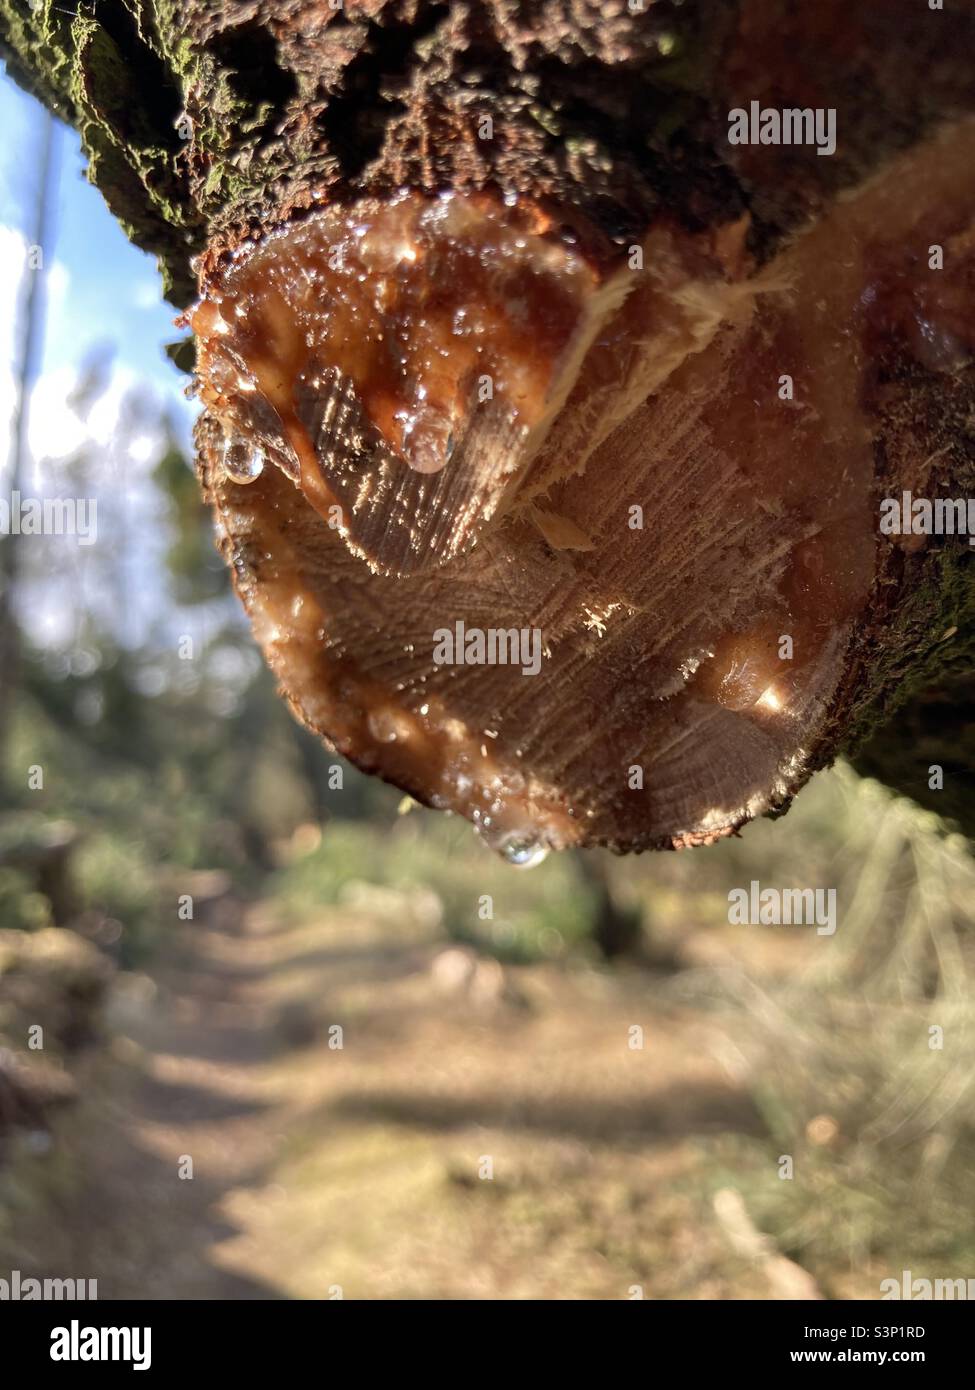 Tree sap dripping from a cut branch Stock Photo